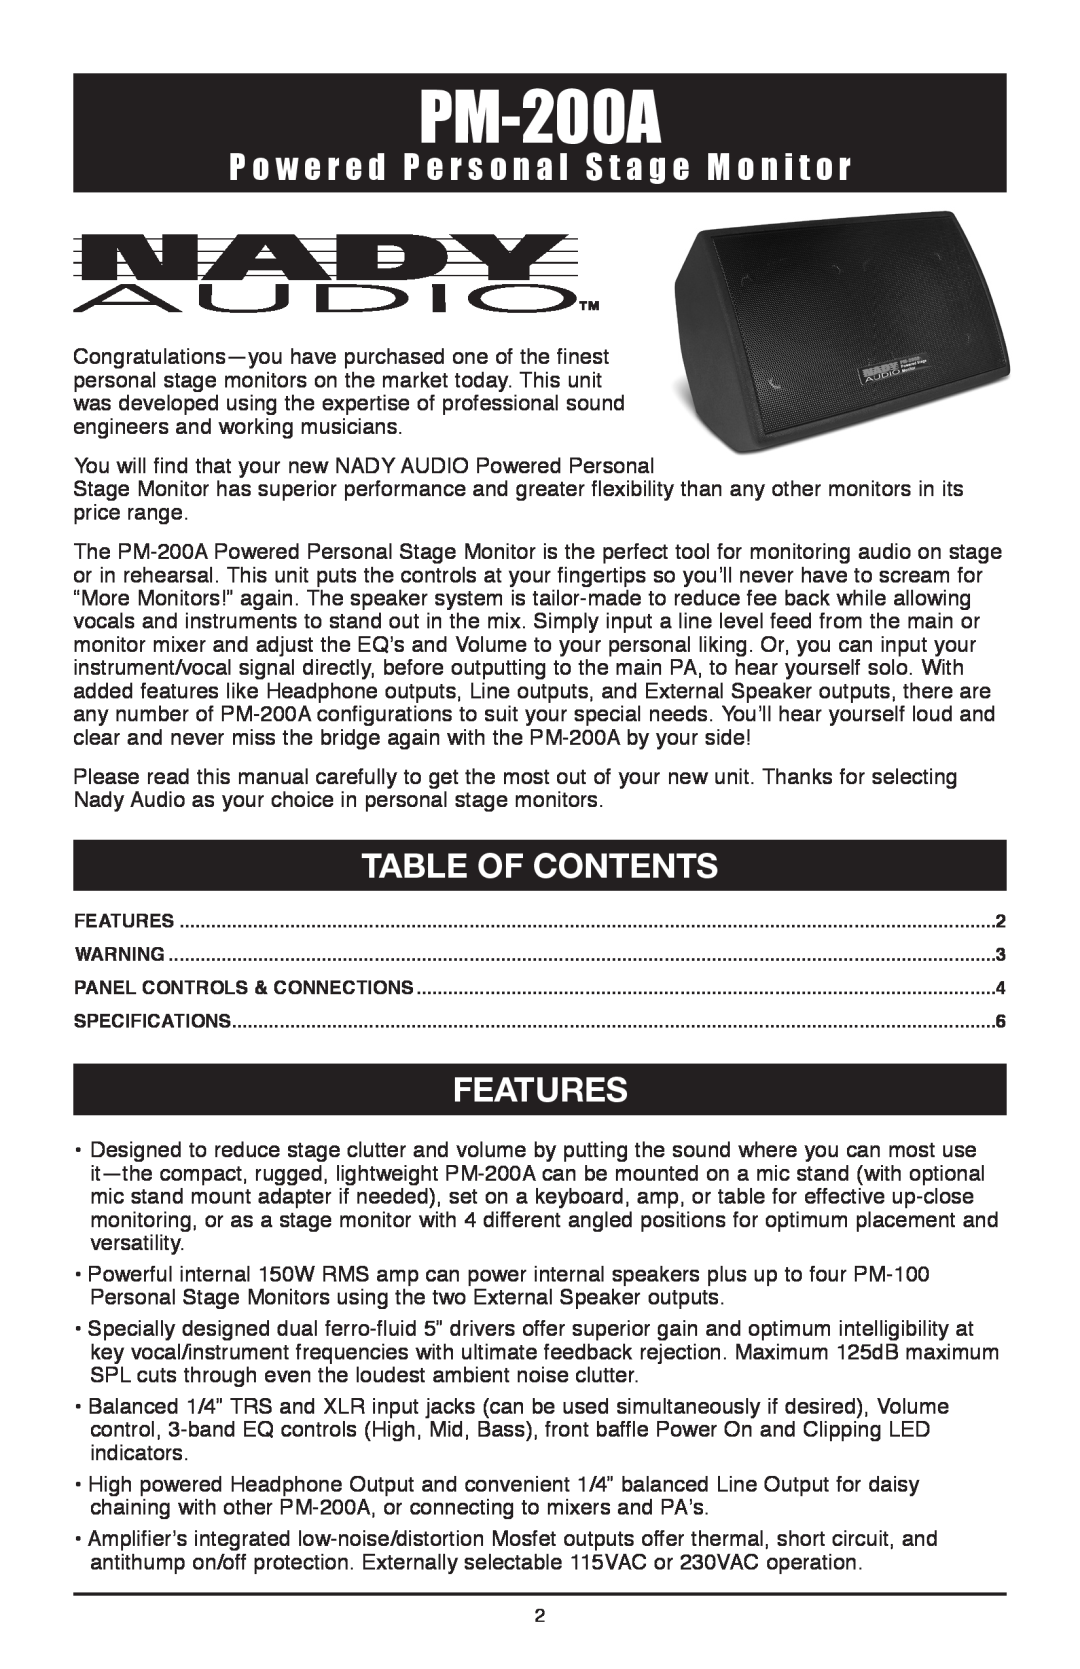 Nady Systems PM-200A owner manual Table of Contents, Features 